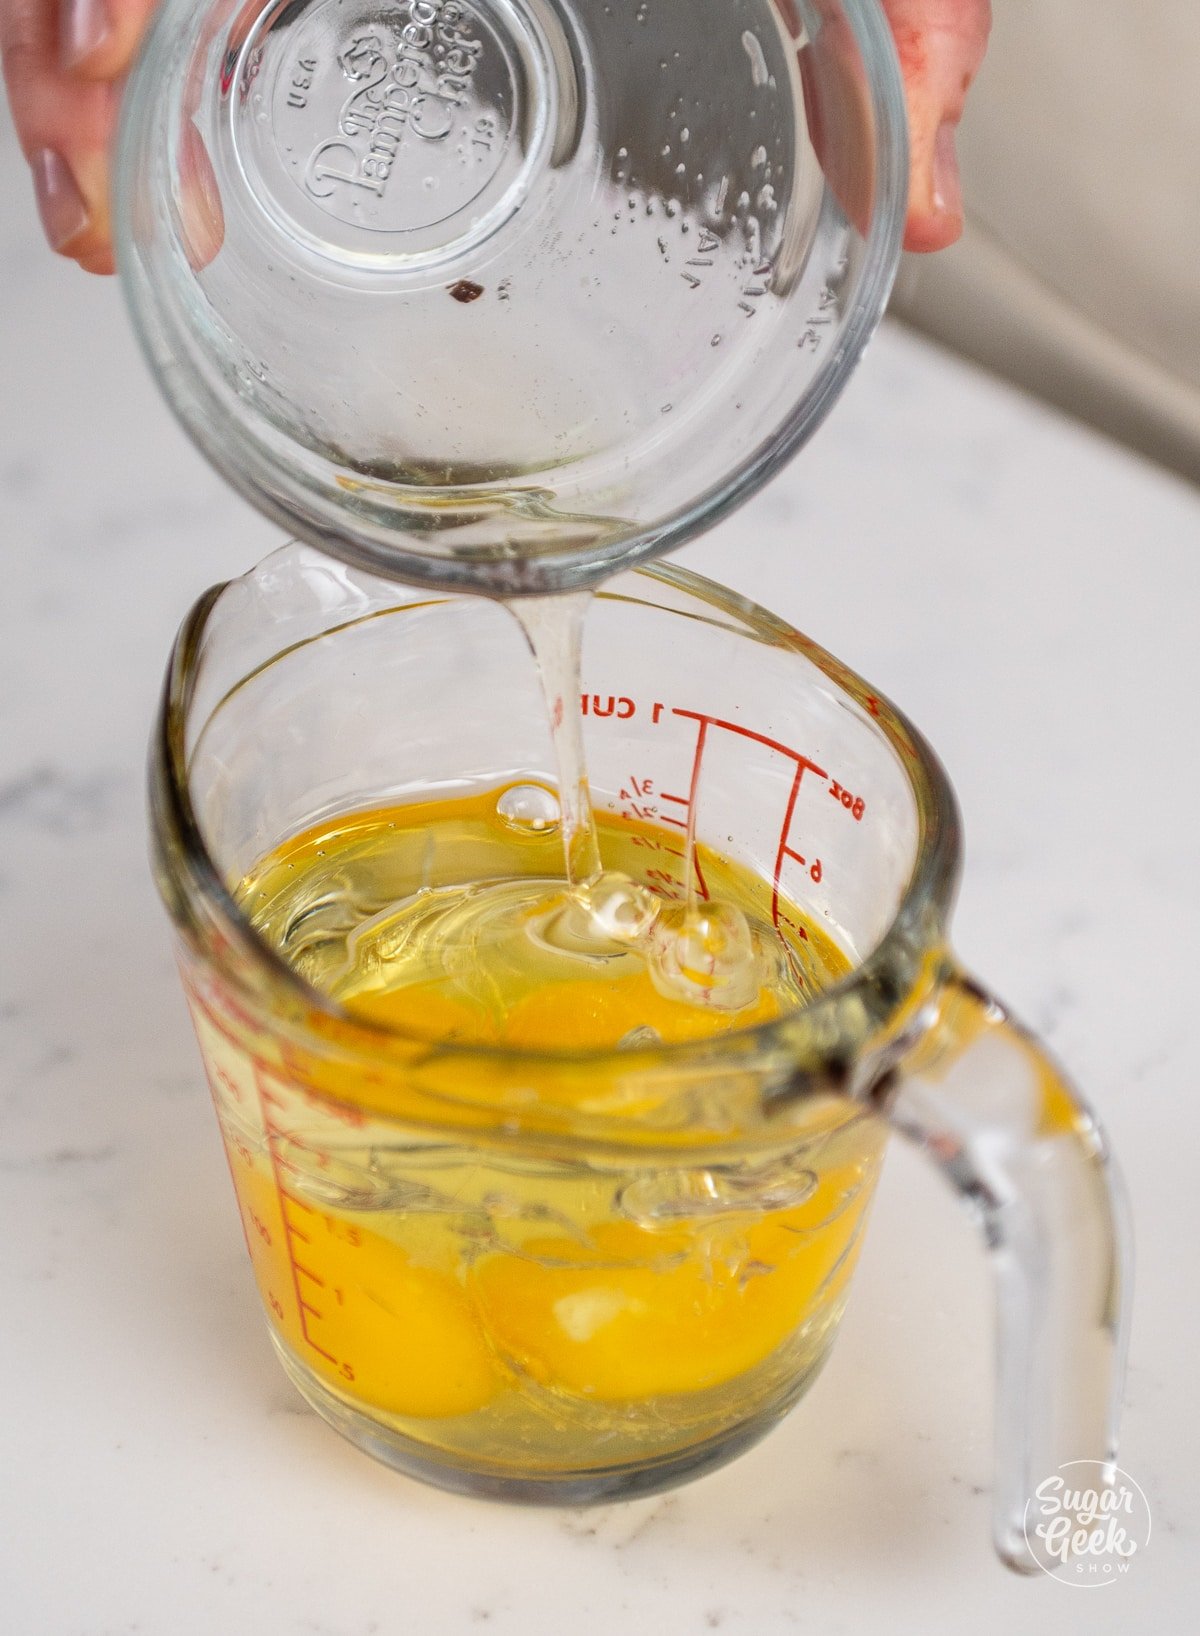 hand adding eggs to oil in a measuring cup.